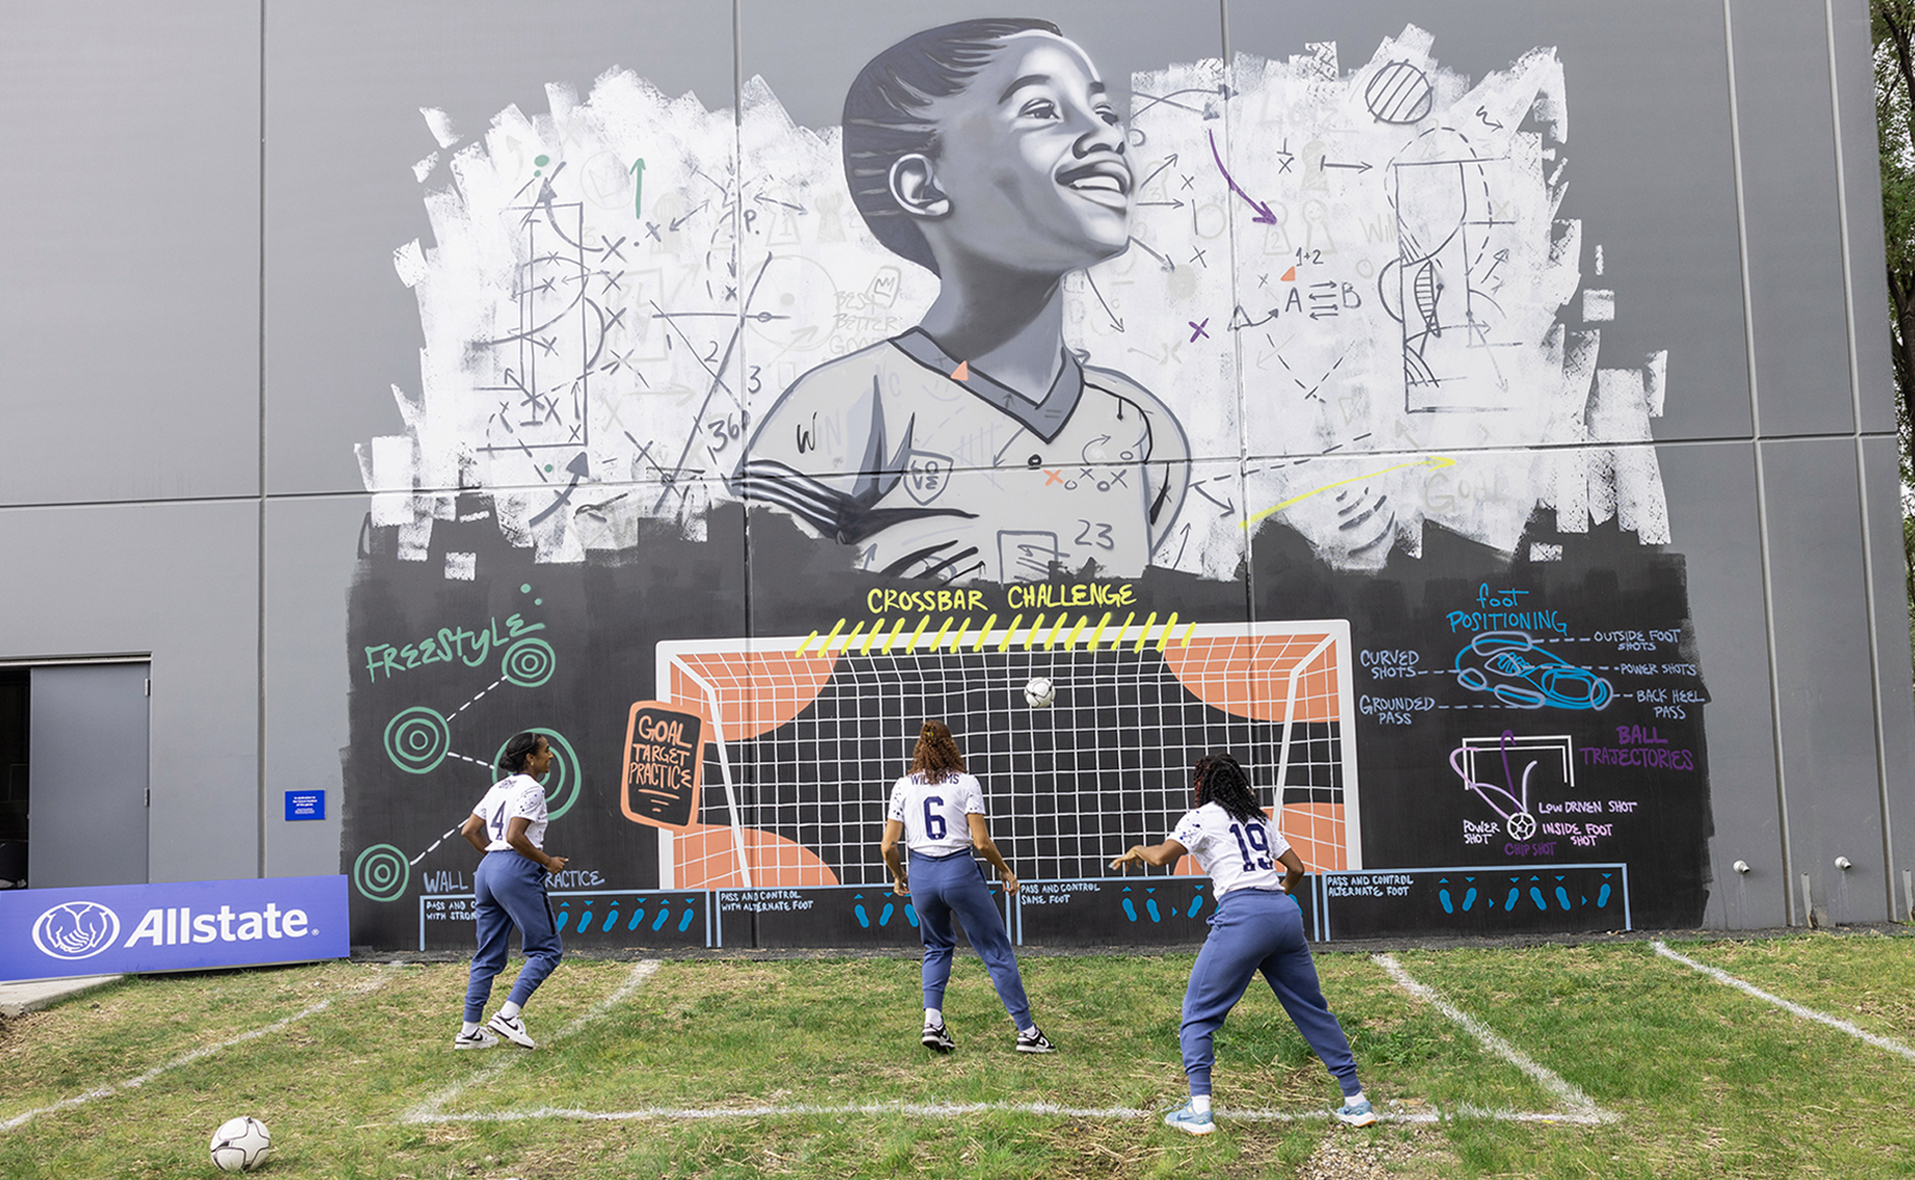 ALLSTATE DEBUTS COACHING MURAL TO DEVELOP YOUTH SOCCER PLAYERS